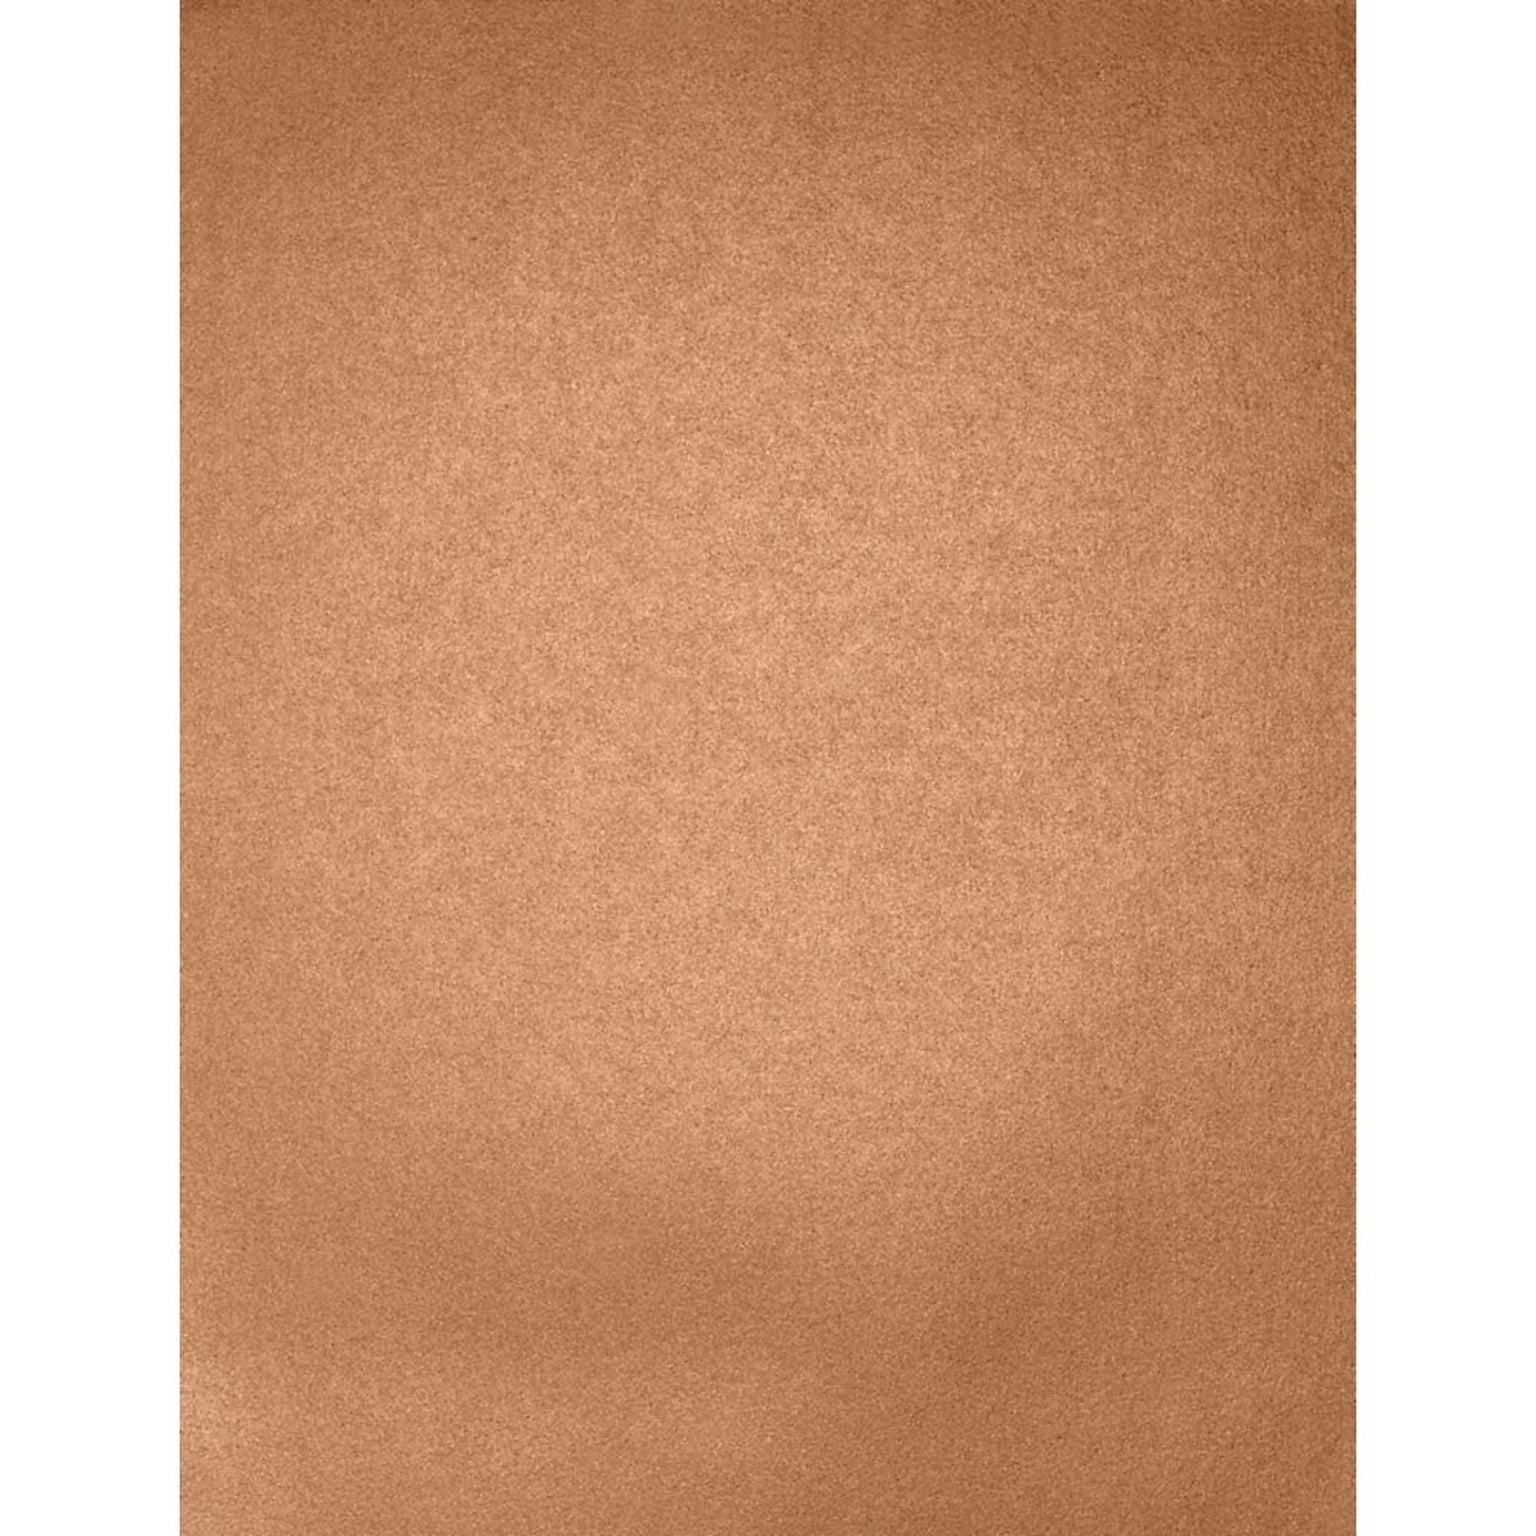 LUX Colored Paper, 32 lbs., 8.5 x 11, Copper Metallic, 50 Sheets/Pack (81211-P-27-50)